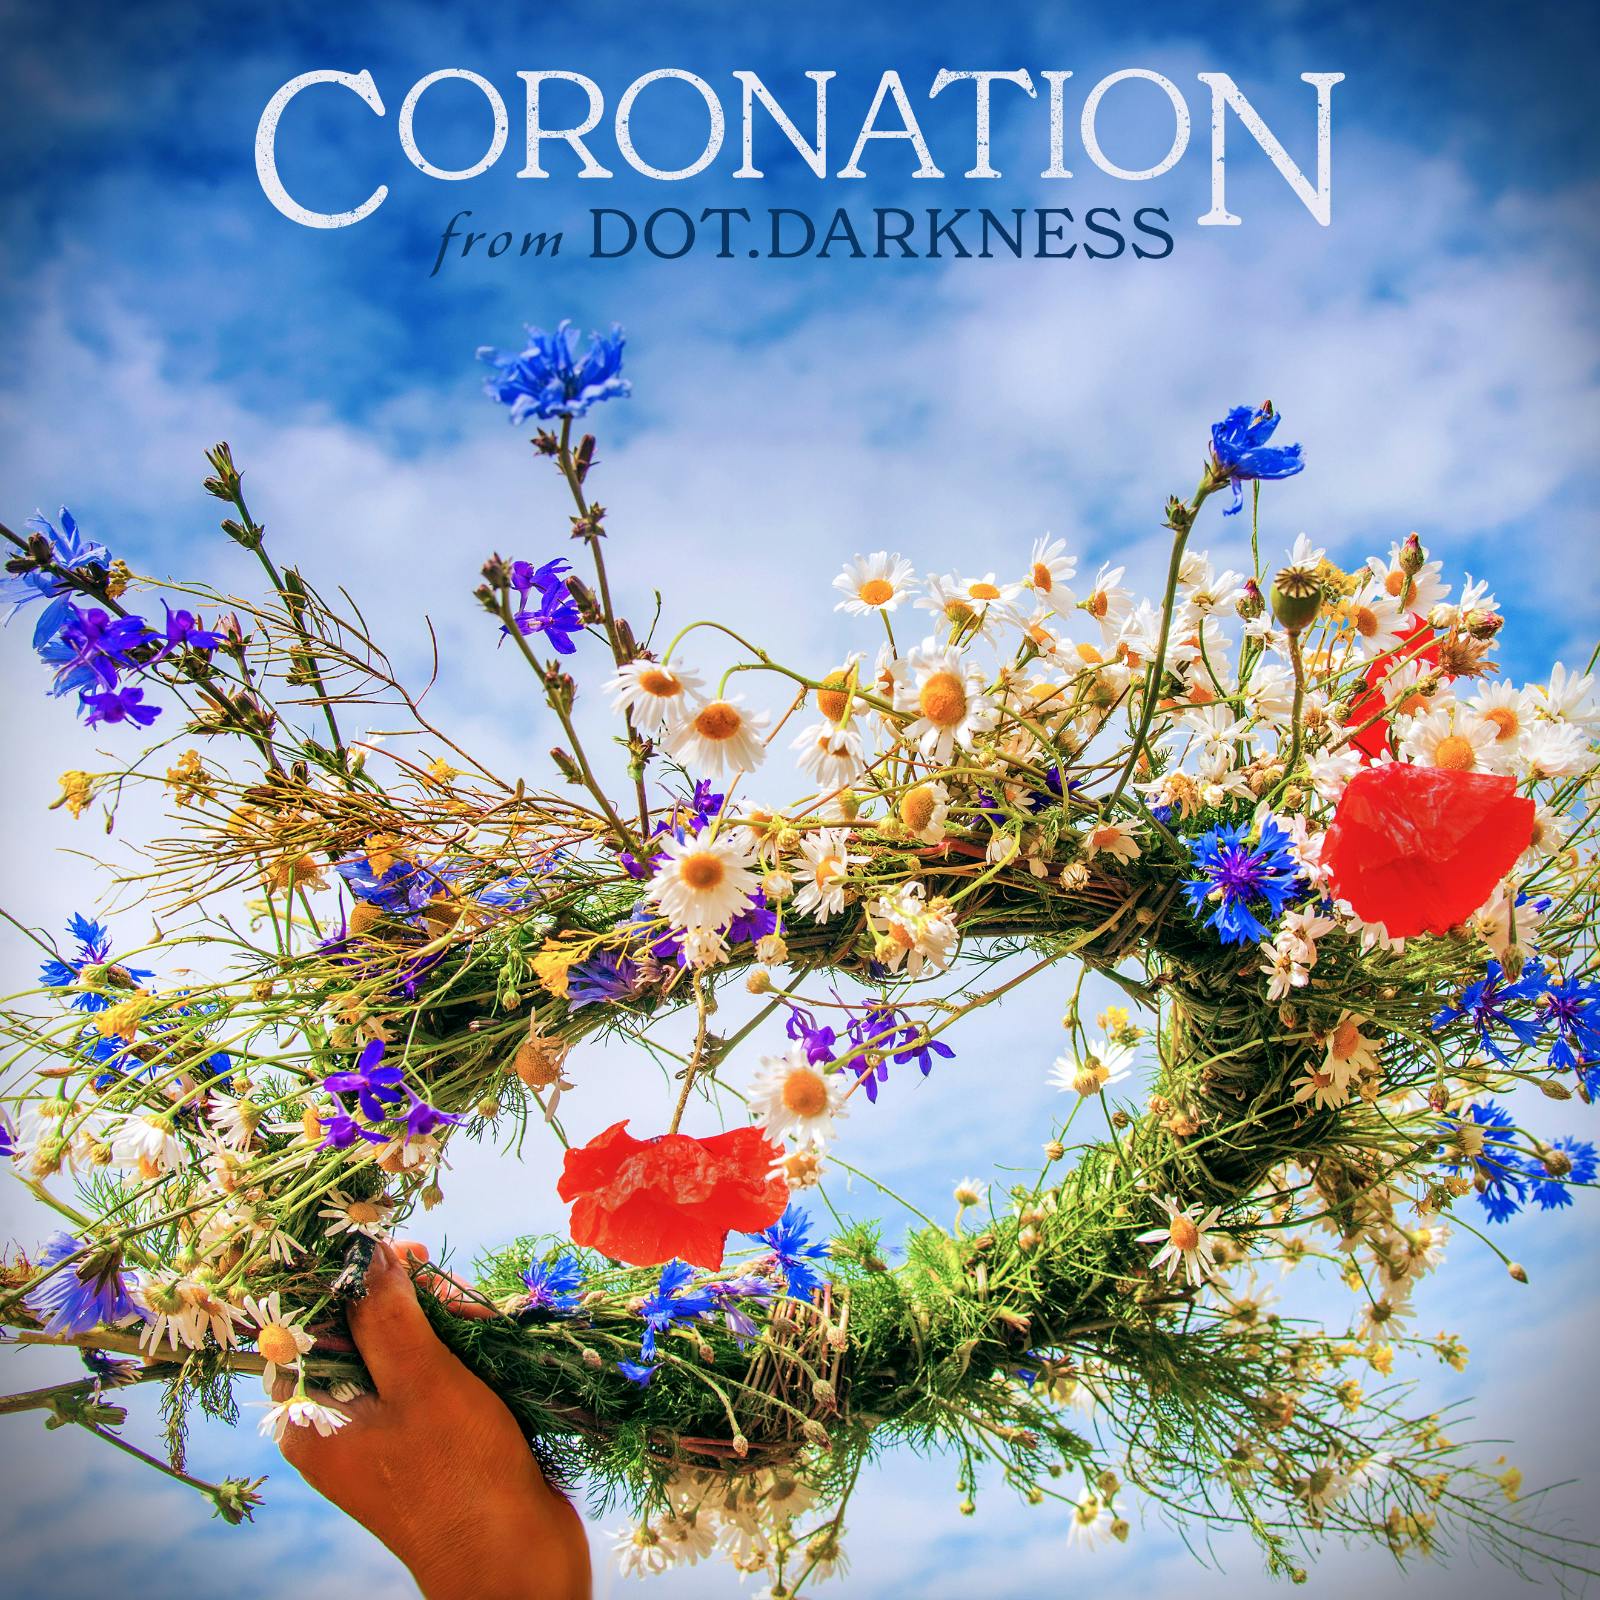 Artwork for Coronation by dot.darkness. A hand holds up a floral crown constructed with bright green, white, red, and indigo flowers against a cloudy blue sky.